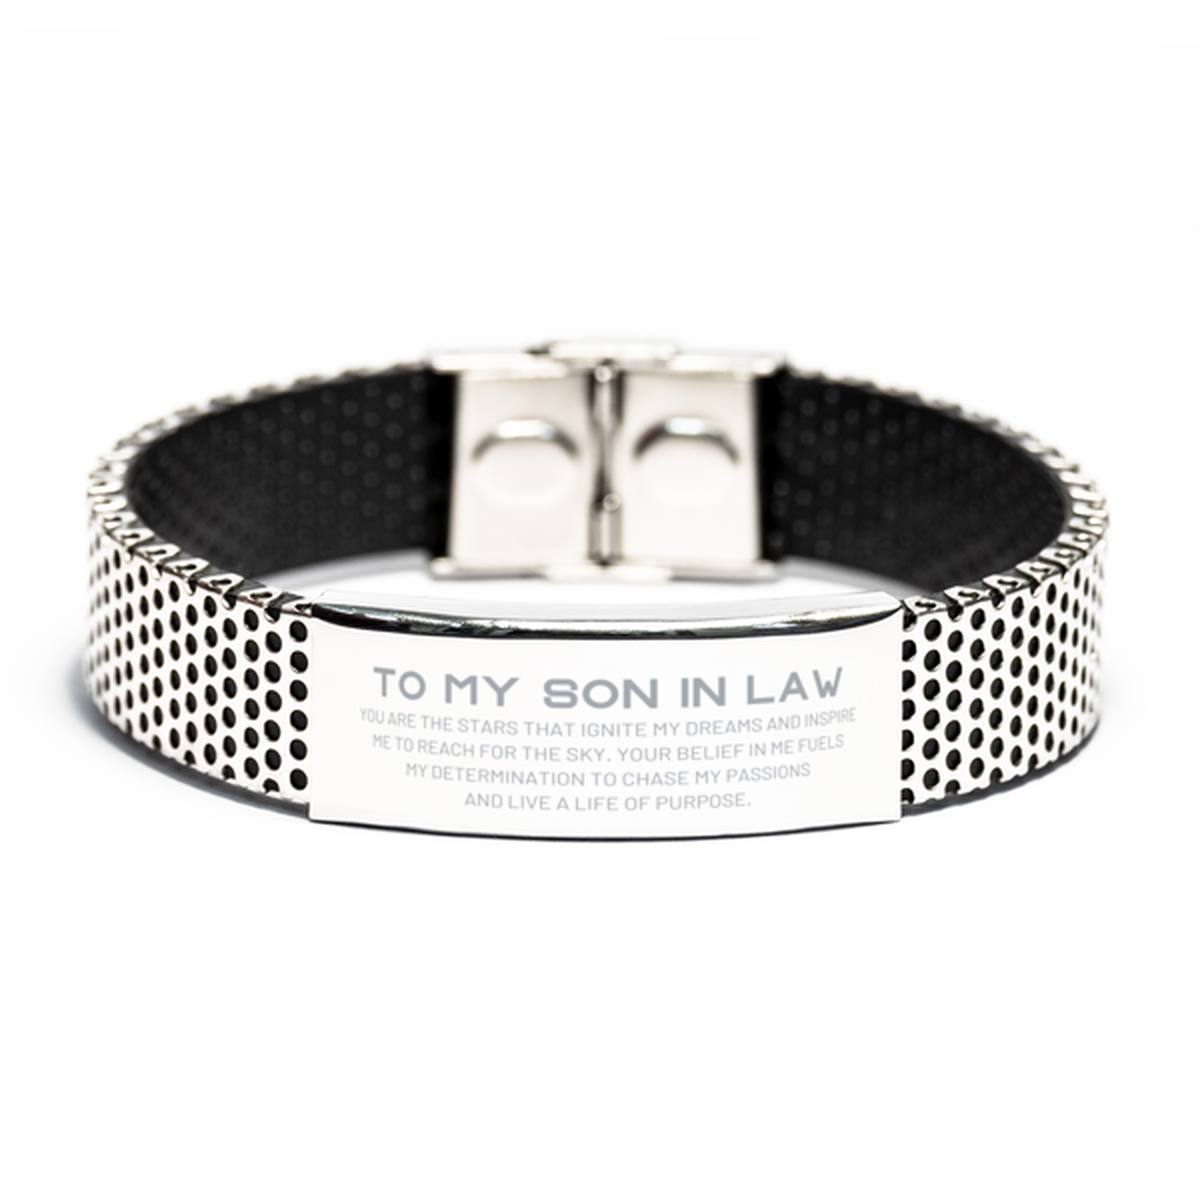 To My Son In Law Stainless Steel Bracelet, You are the stars that ignite my dreams and inspire me to reach for the sky, Birthday Unique Gifts For Son In Law, Thank You Gifts For Son In Law